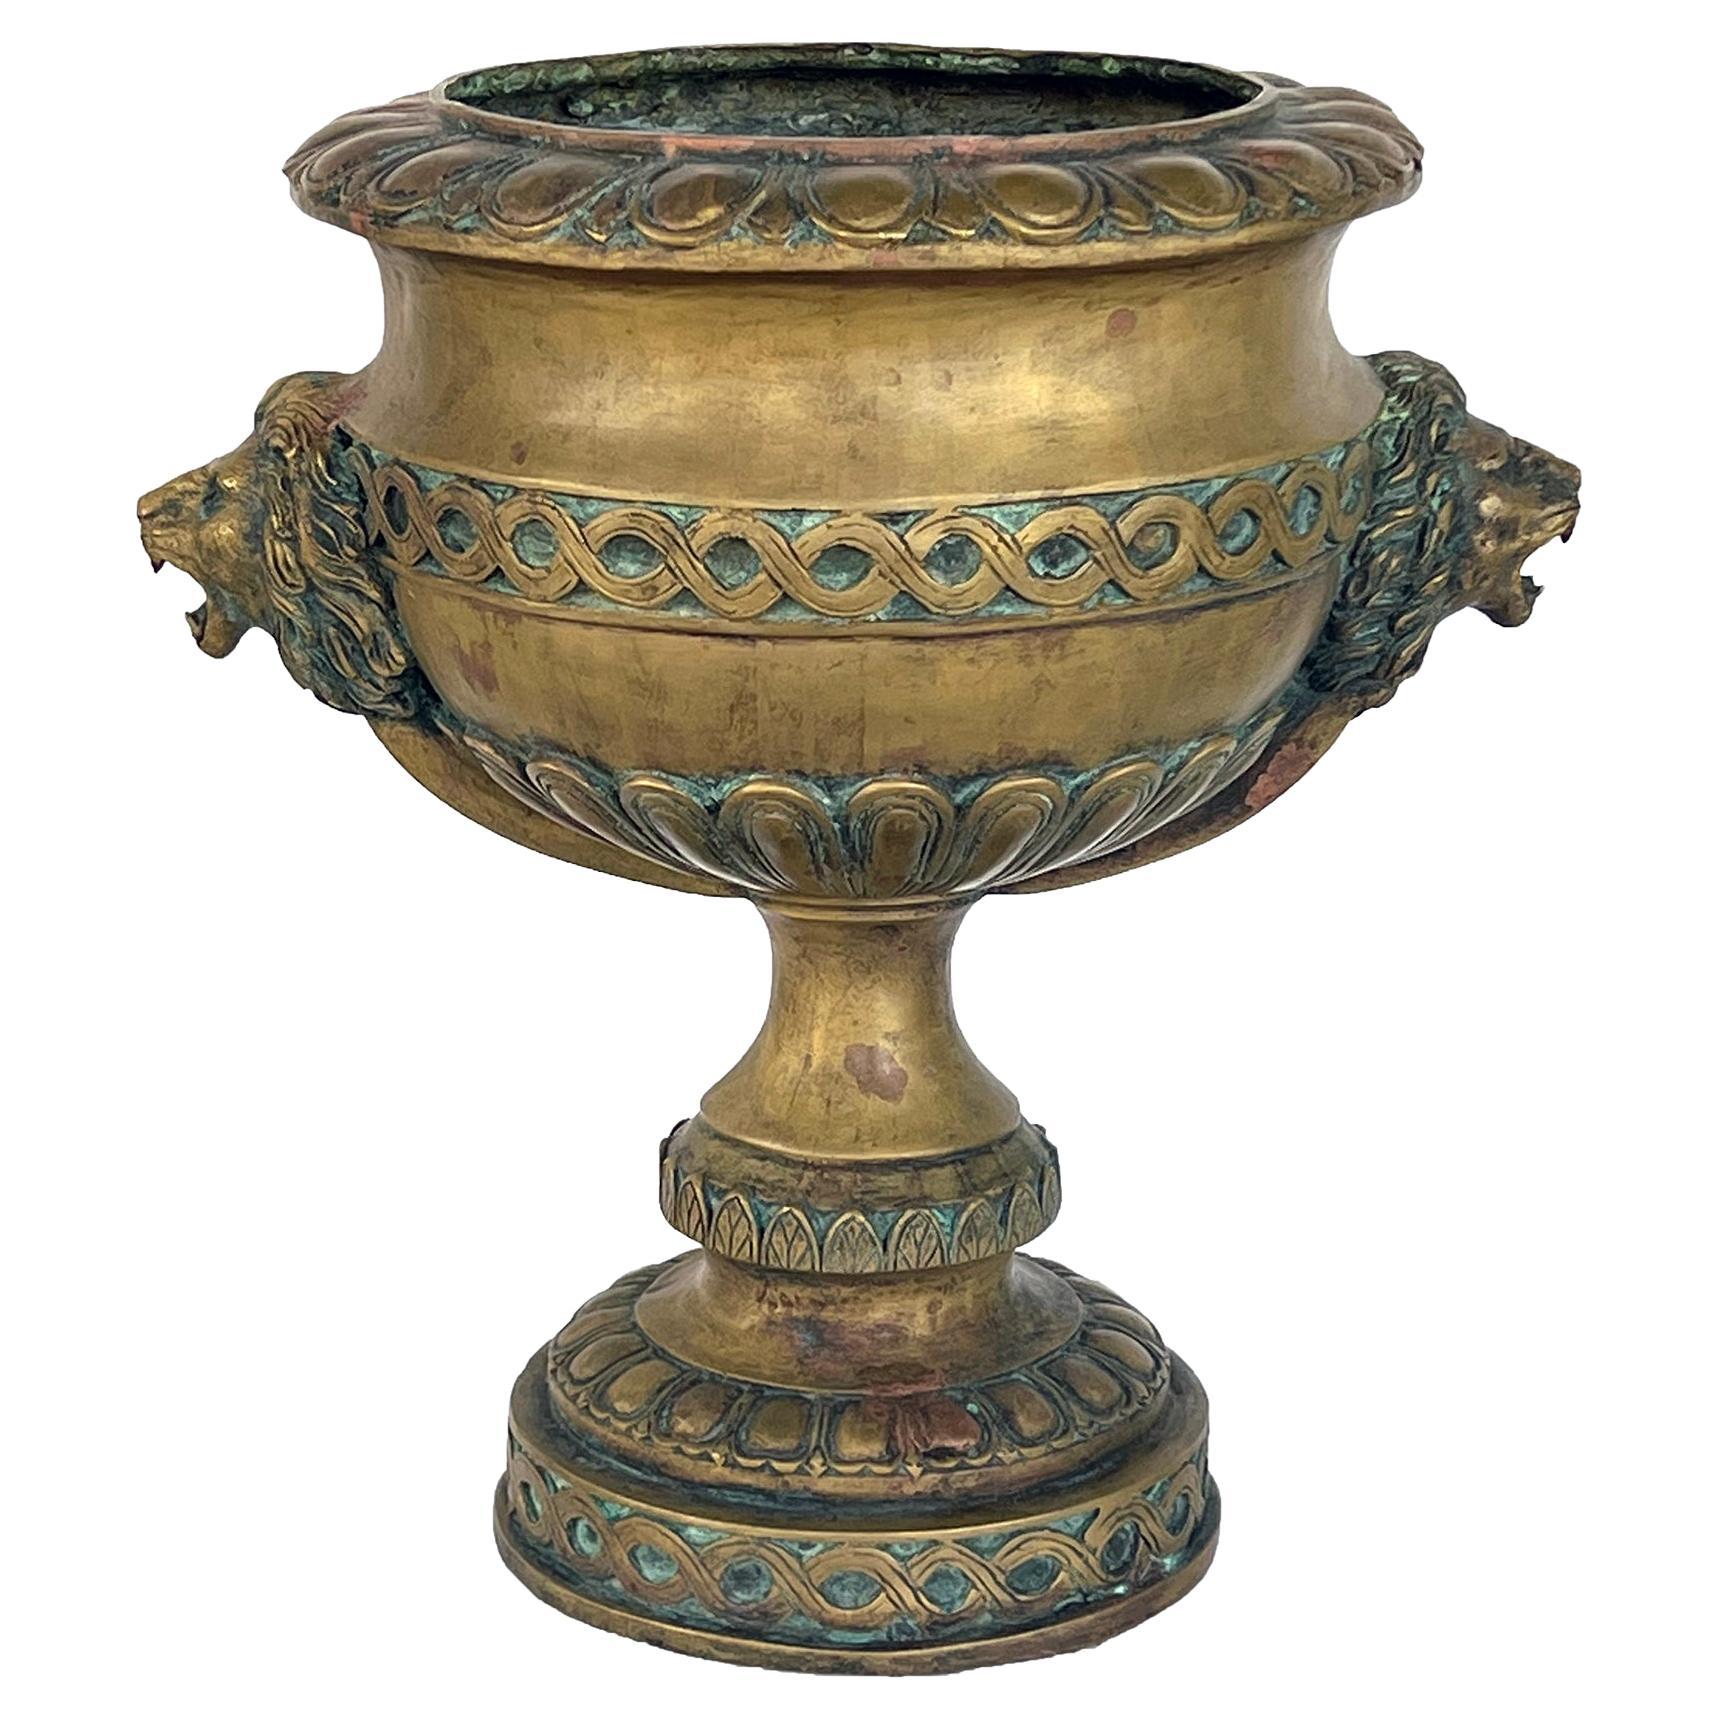 French Louis XVI Style Brass Pedestal Urn with Lion Mask Handles